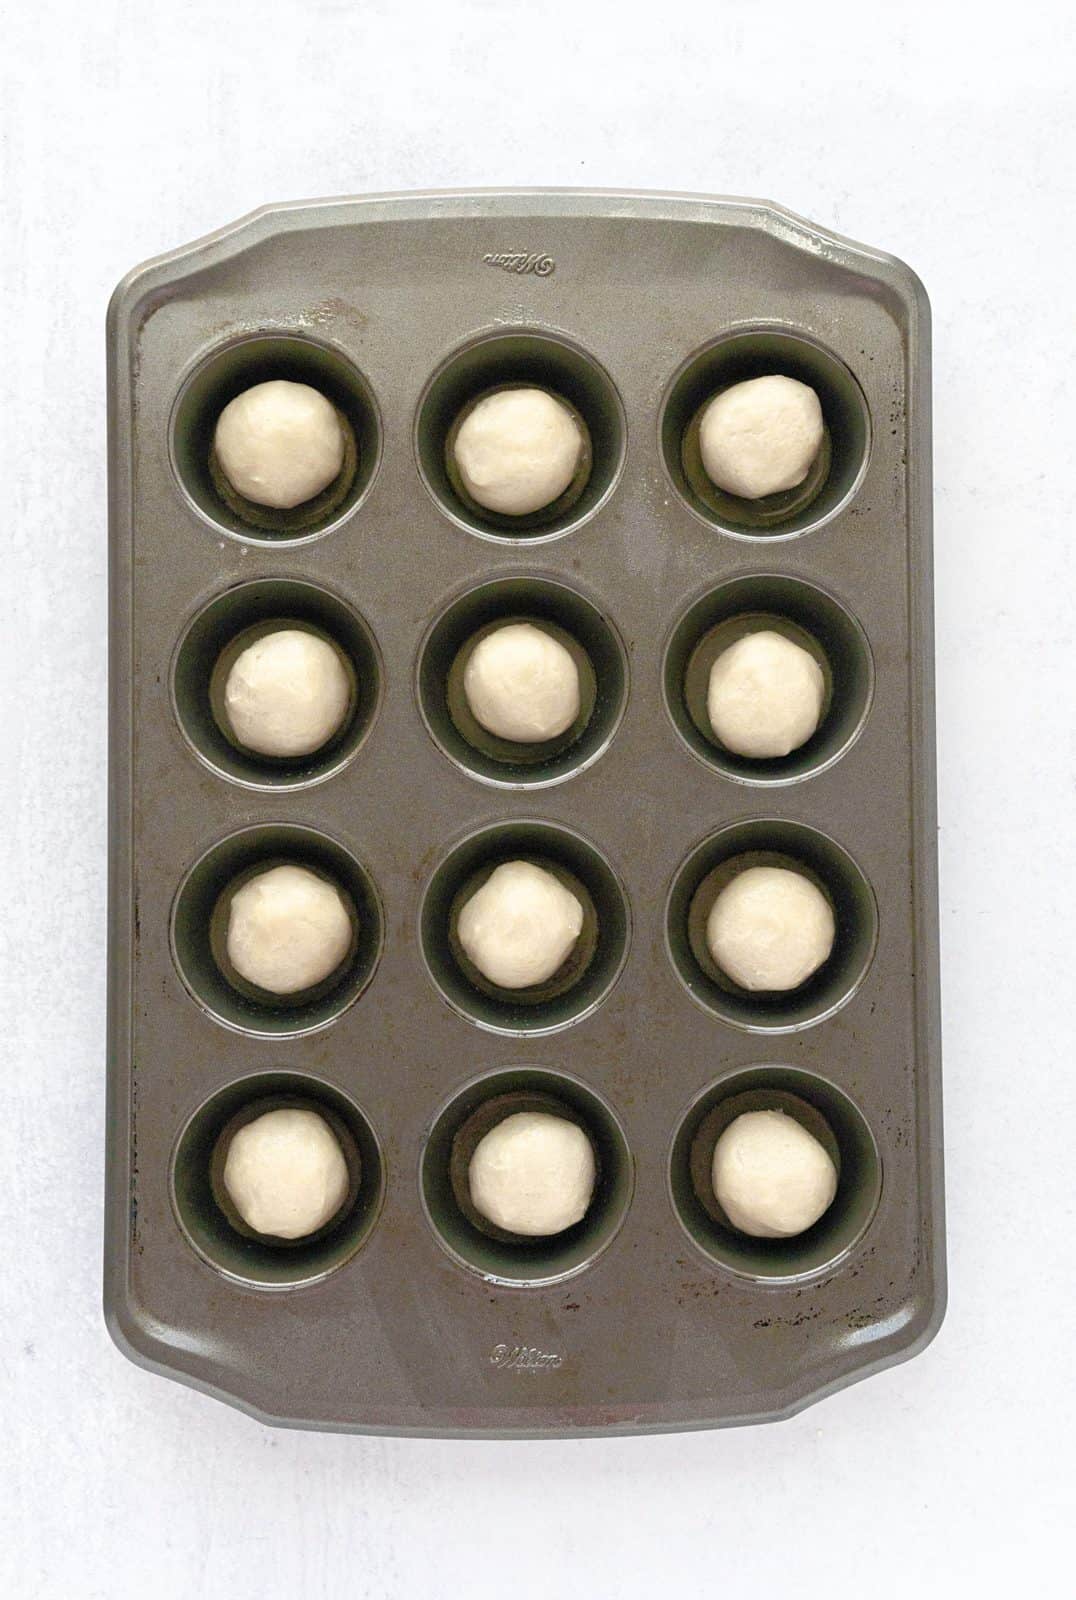 Cookie dough placed into muffin tin.